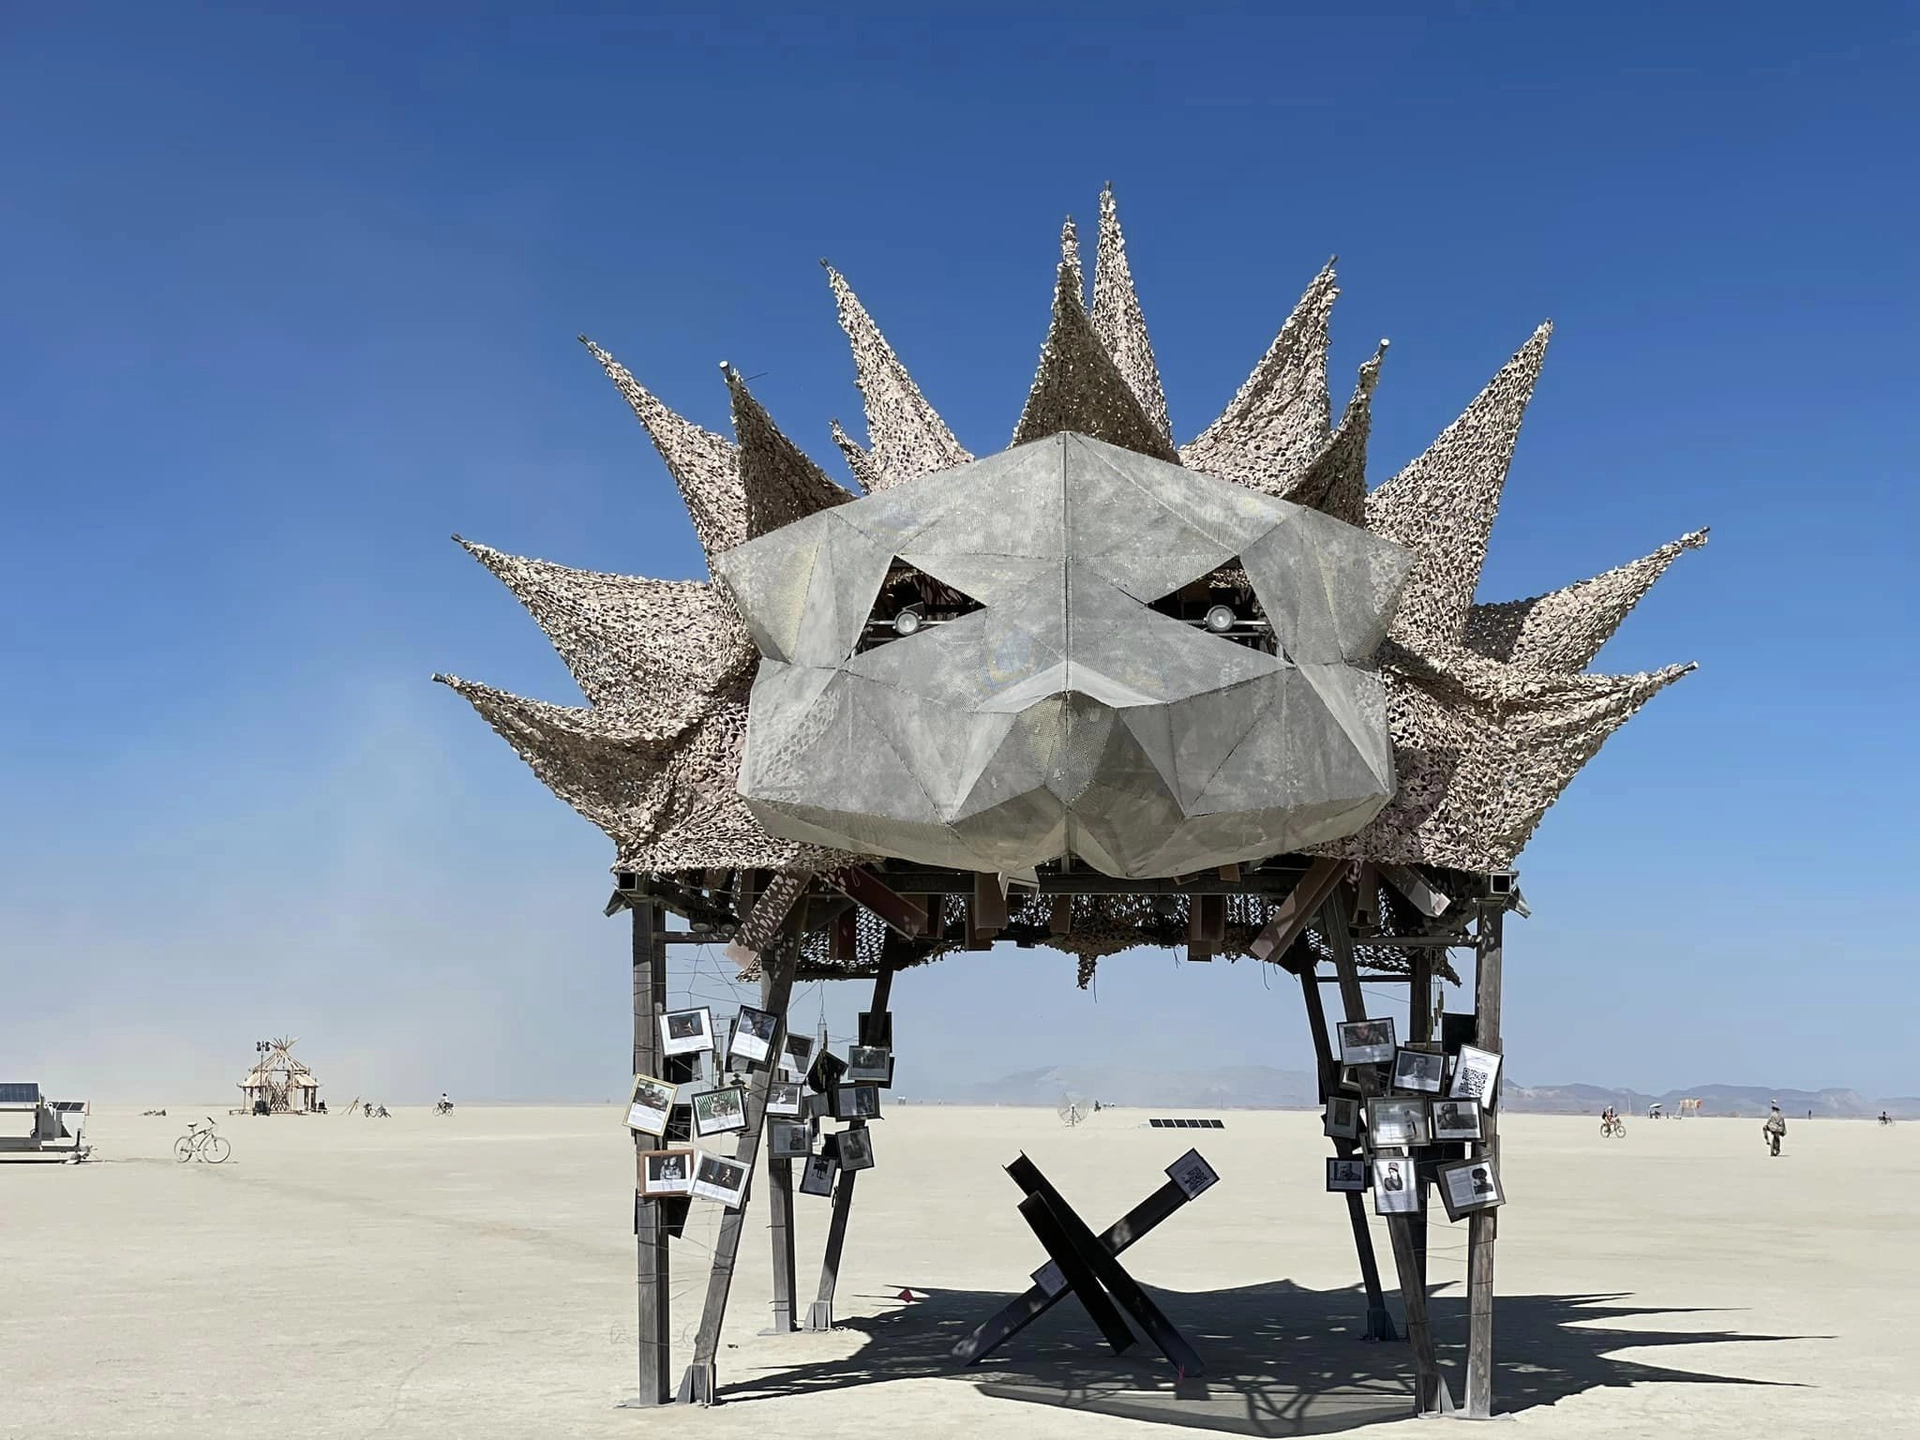 The Hedgehog Temple: A Tribute to Fallen Ukrainians at Burning Man